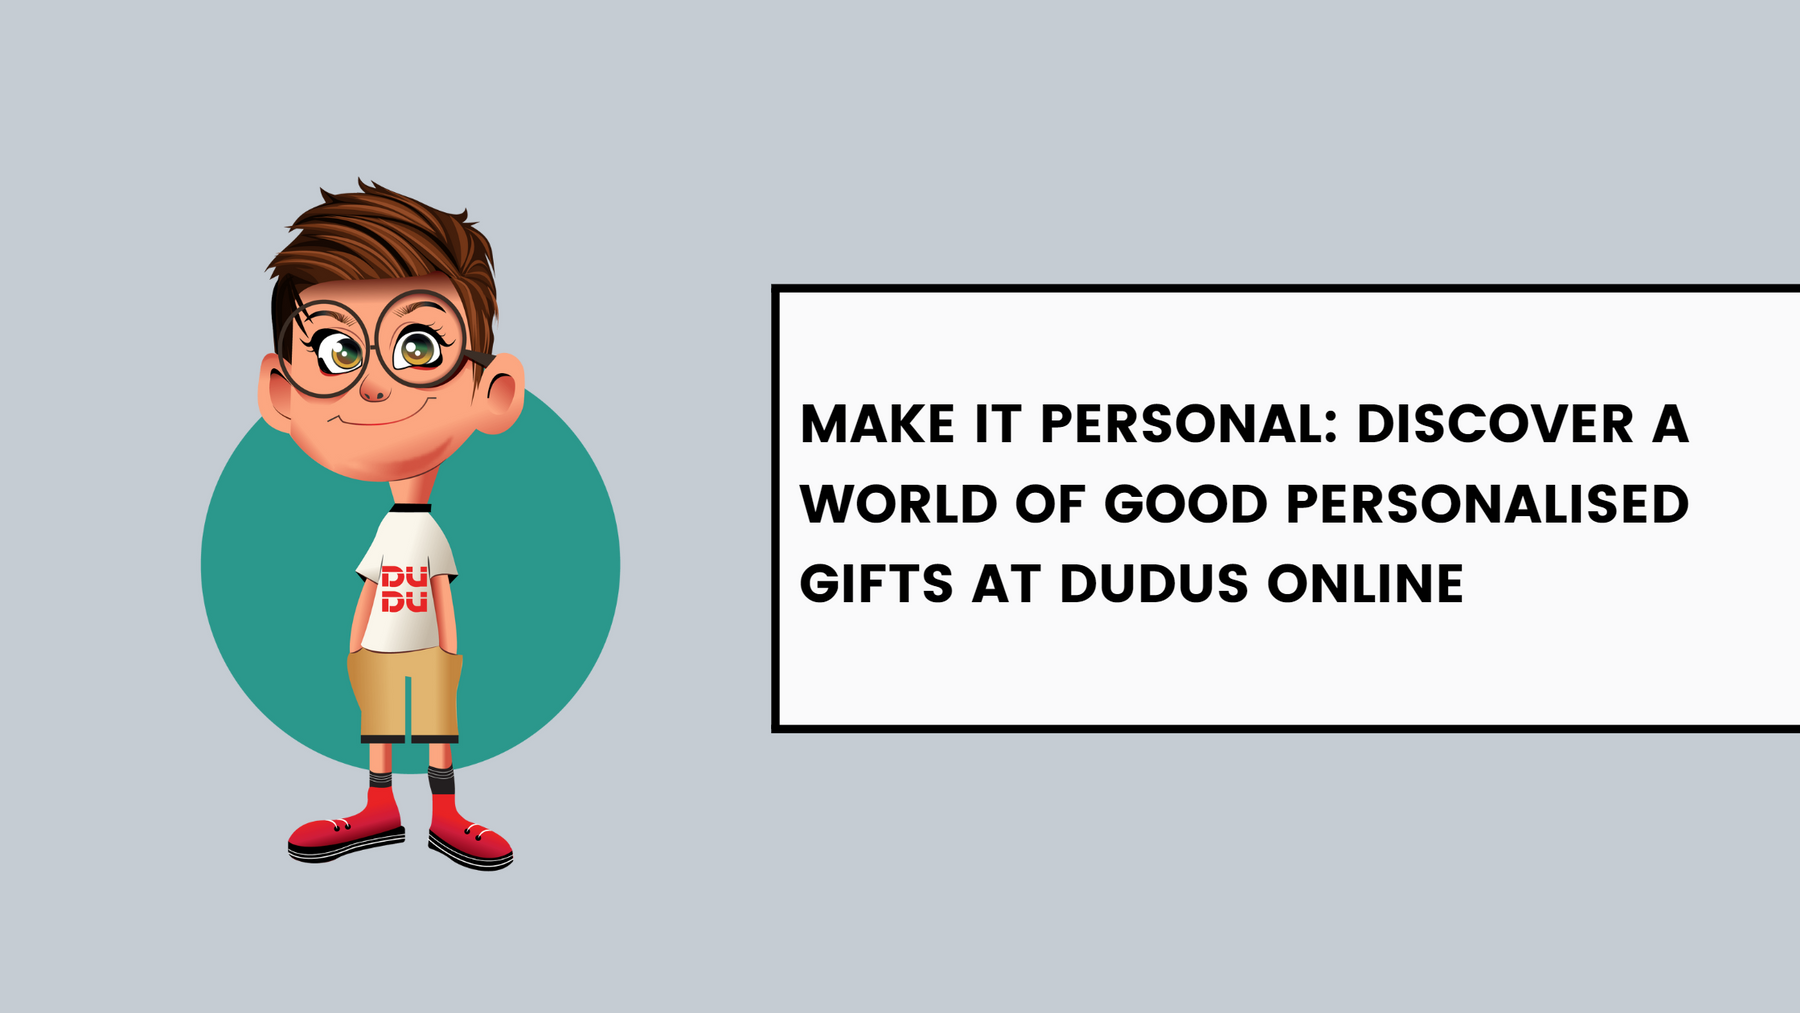 Make It Personal: Discover A World Of Good Personalised Gifts At Dudus Online